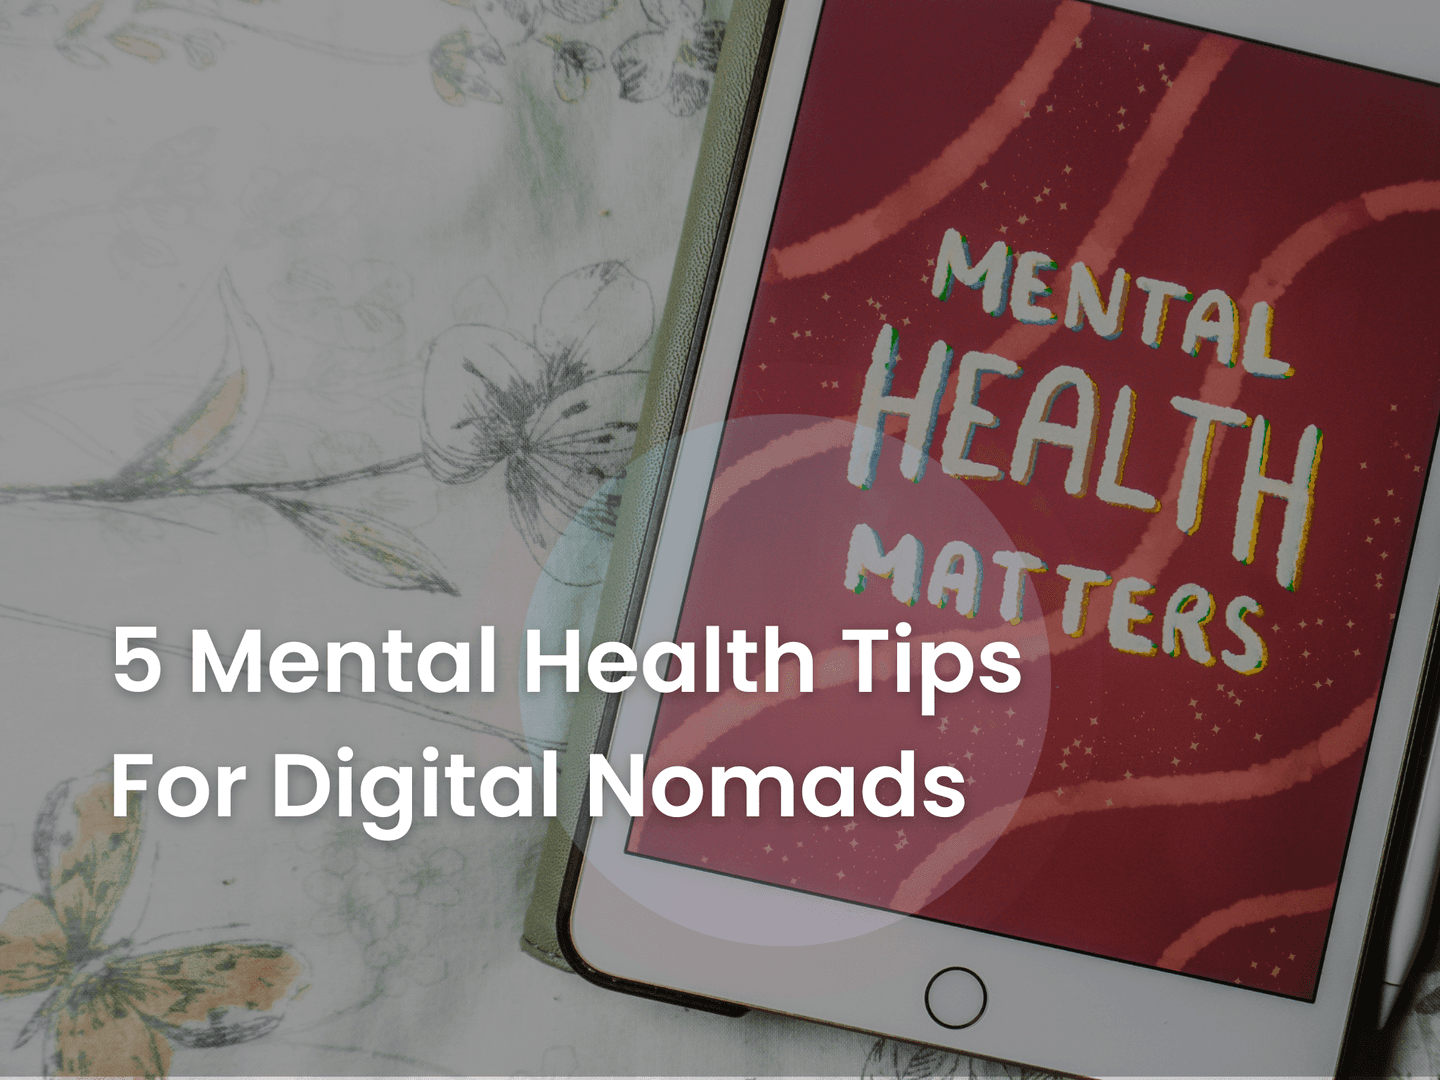 5 mental health tips for digital nomads to try today